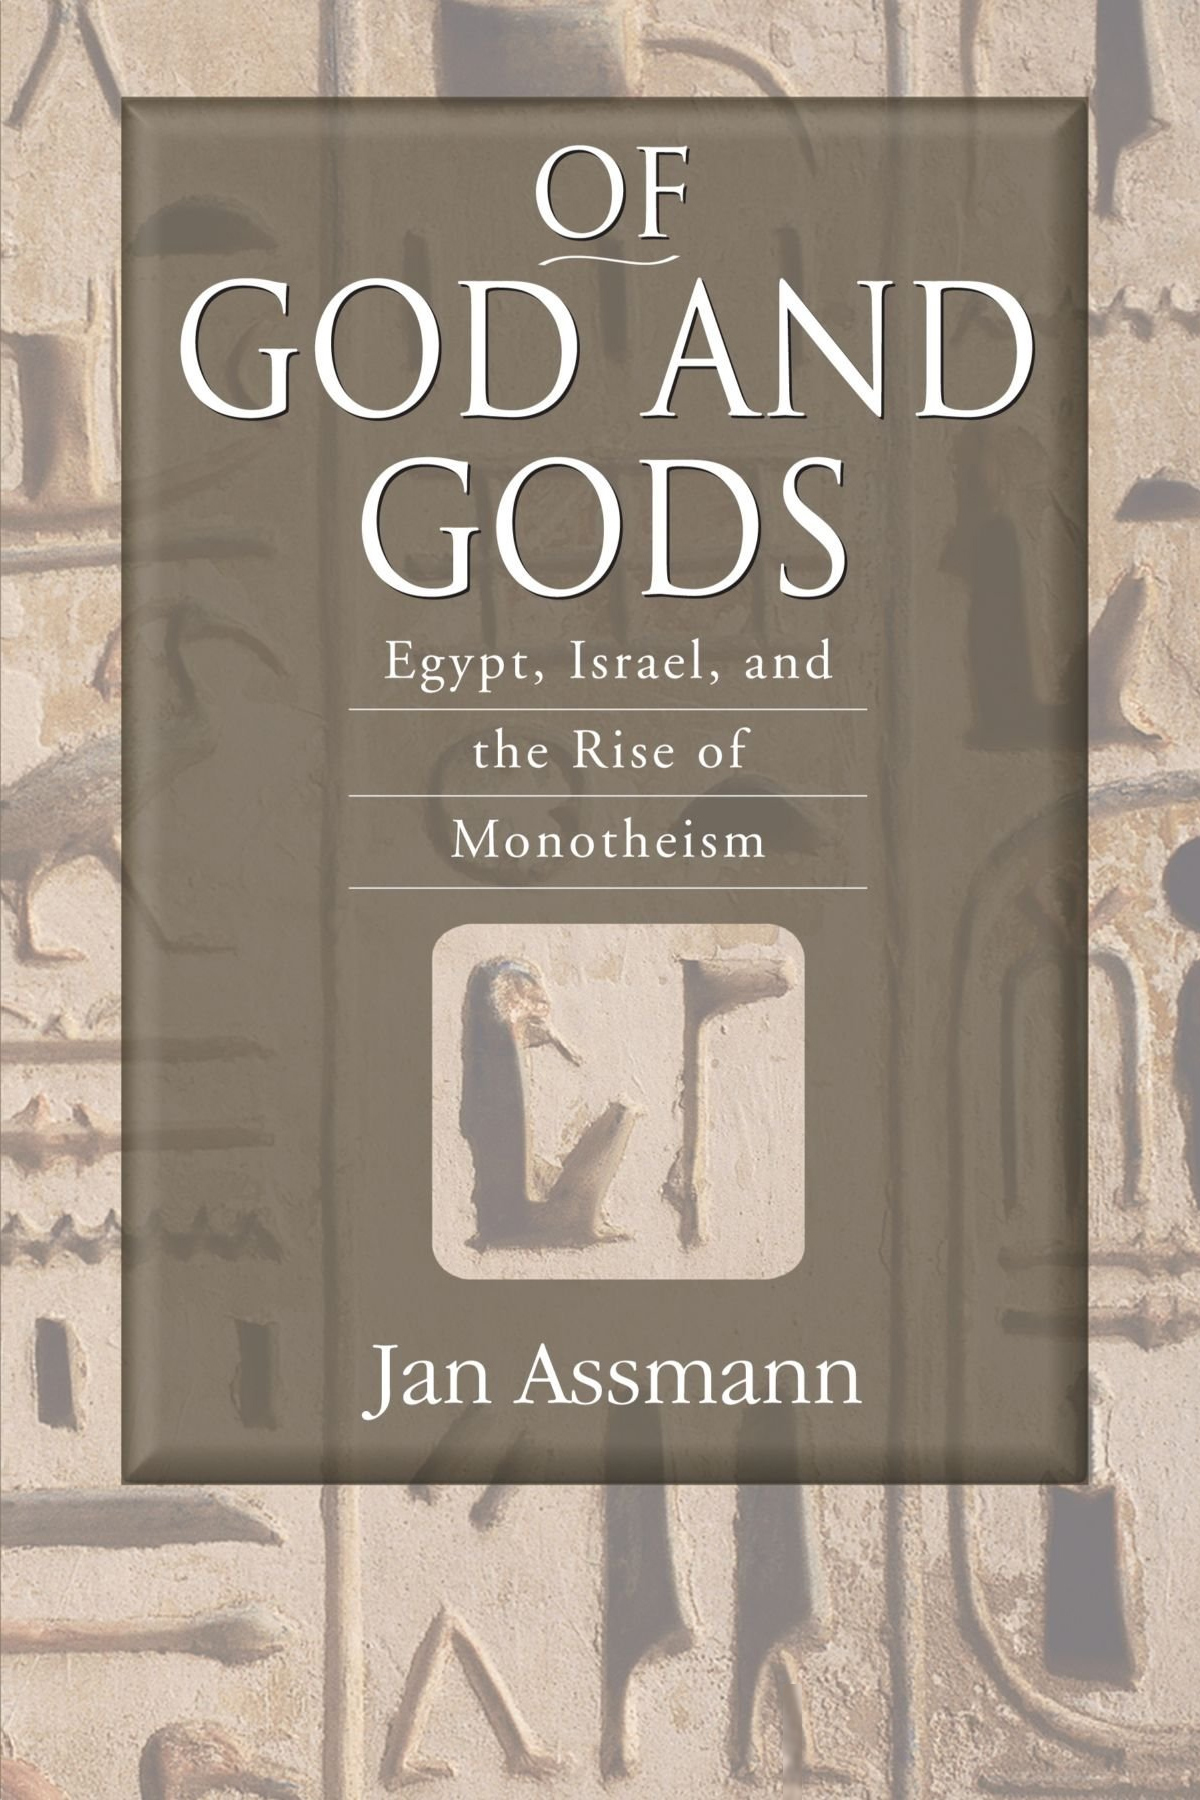 Jan Assmann's book 'Of God and Gods -Egypt, Israel, and the Rise of Monotheism' (May 21, 2008)